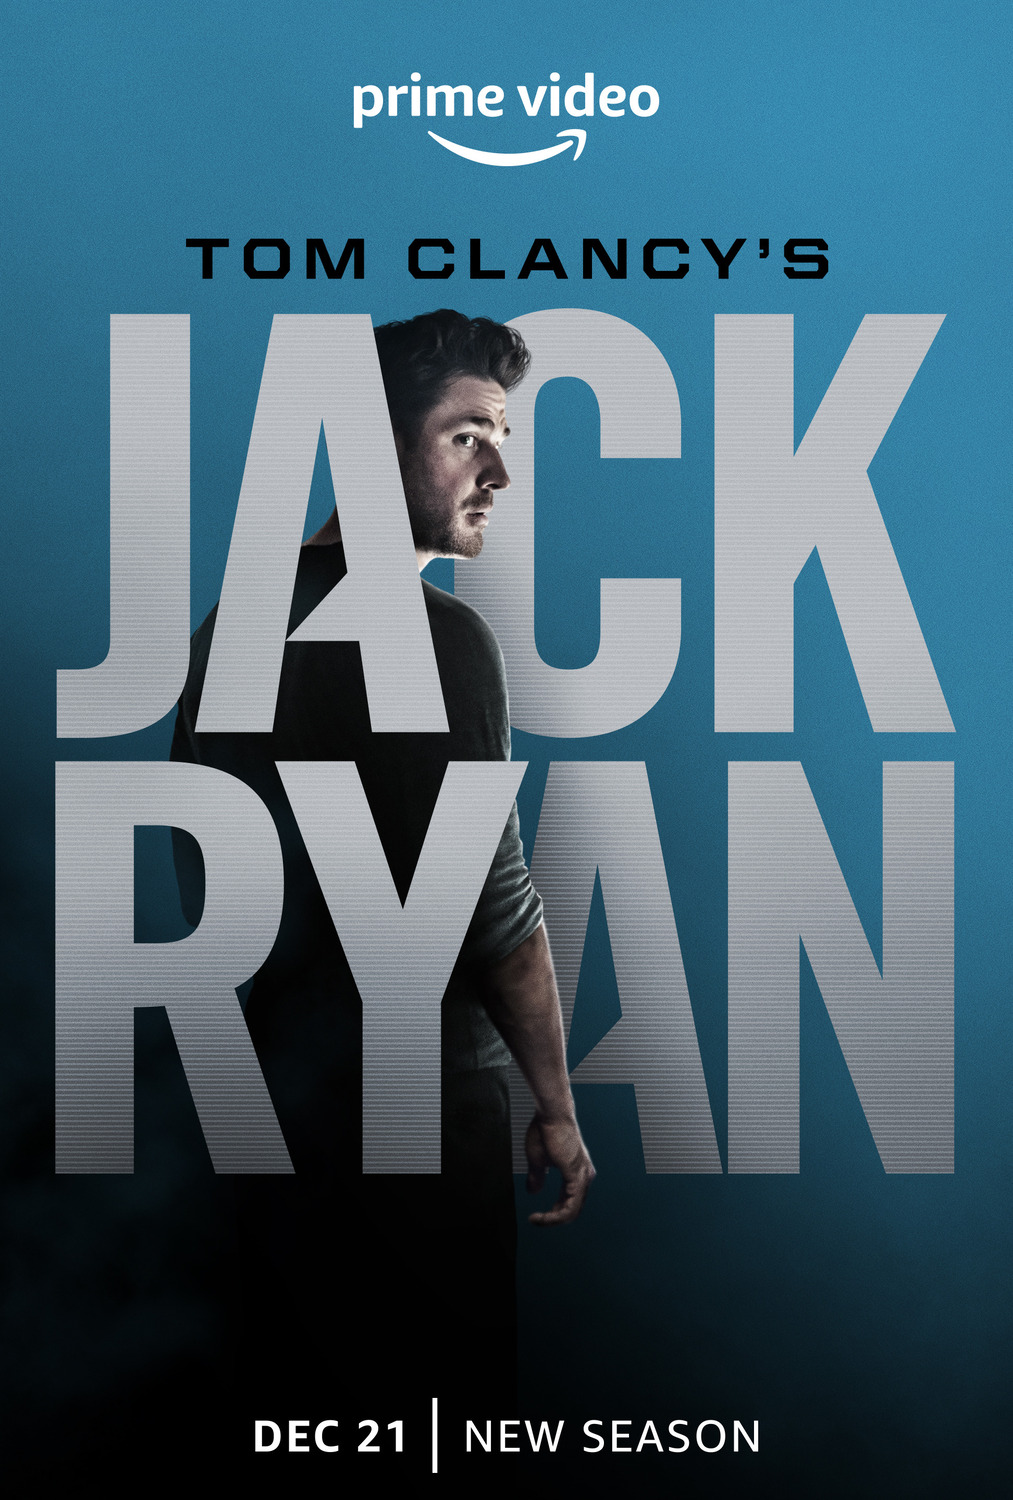 Extra Large TV Poster Image for Tom Clancy's Jack Ryan (#7 of 11)